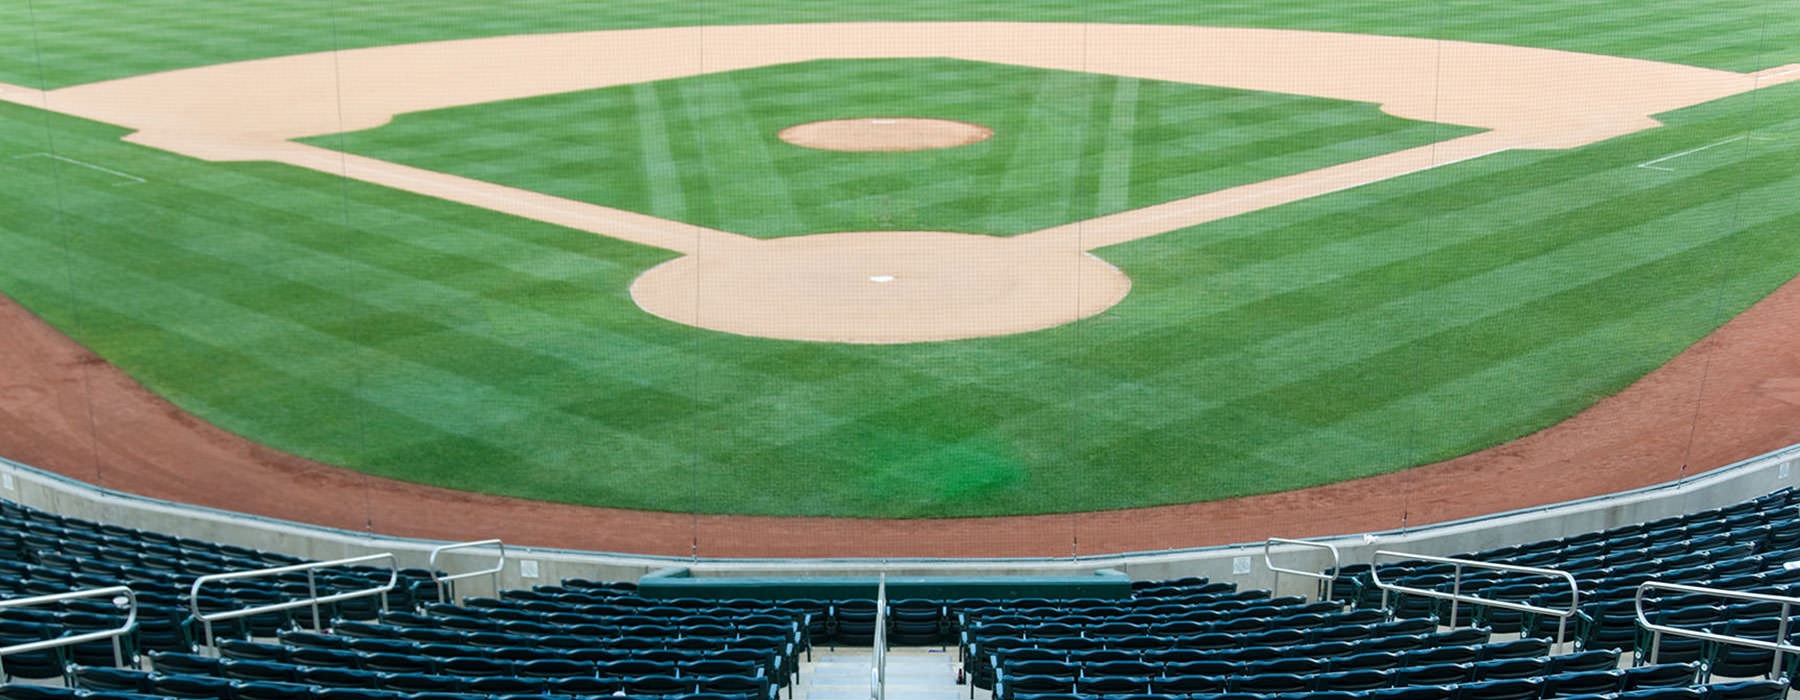 view of coolray stadium field